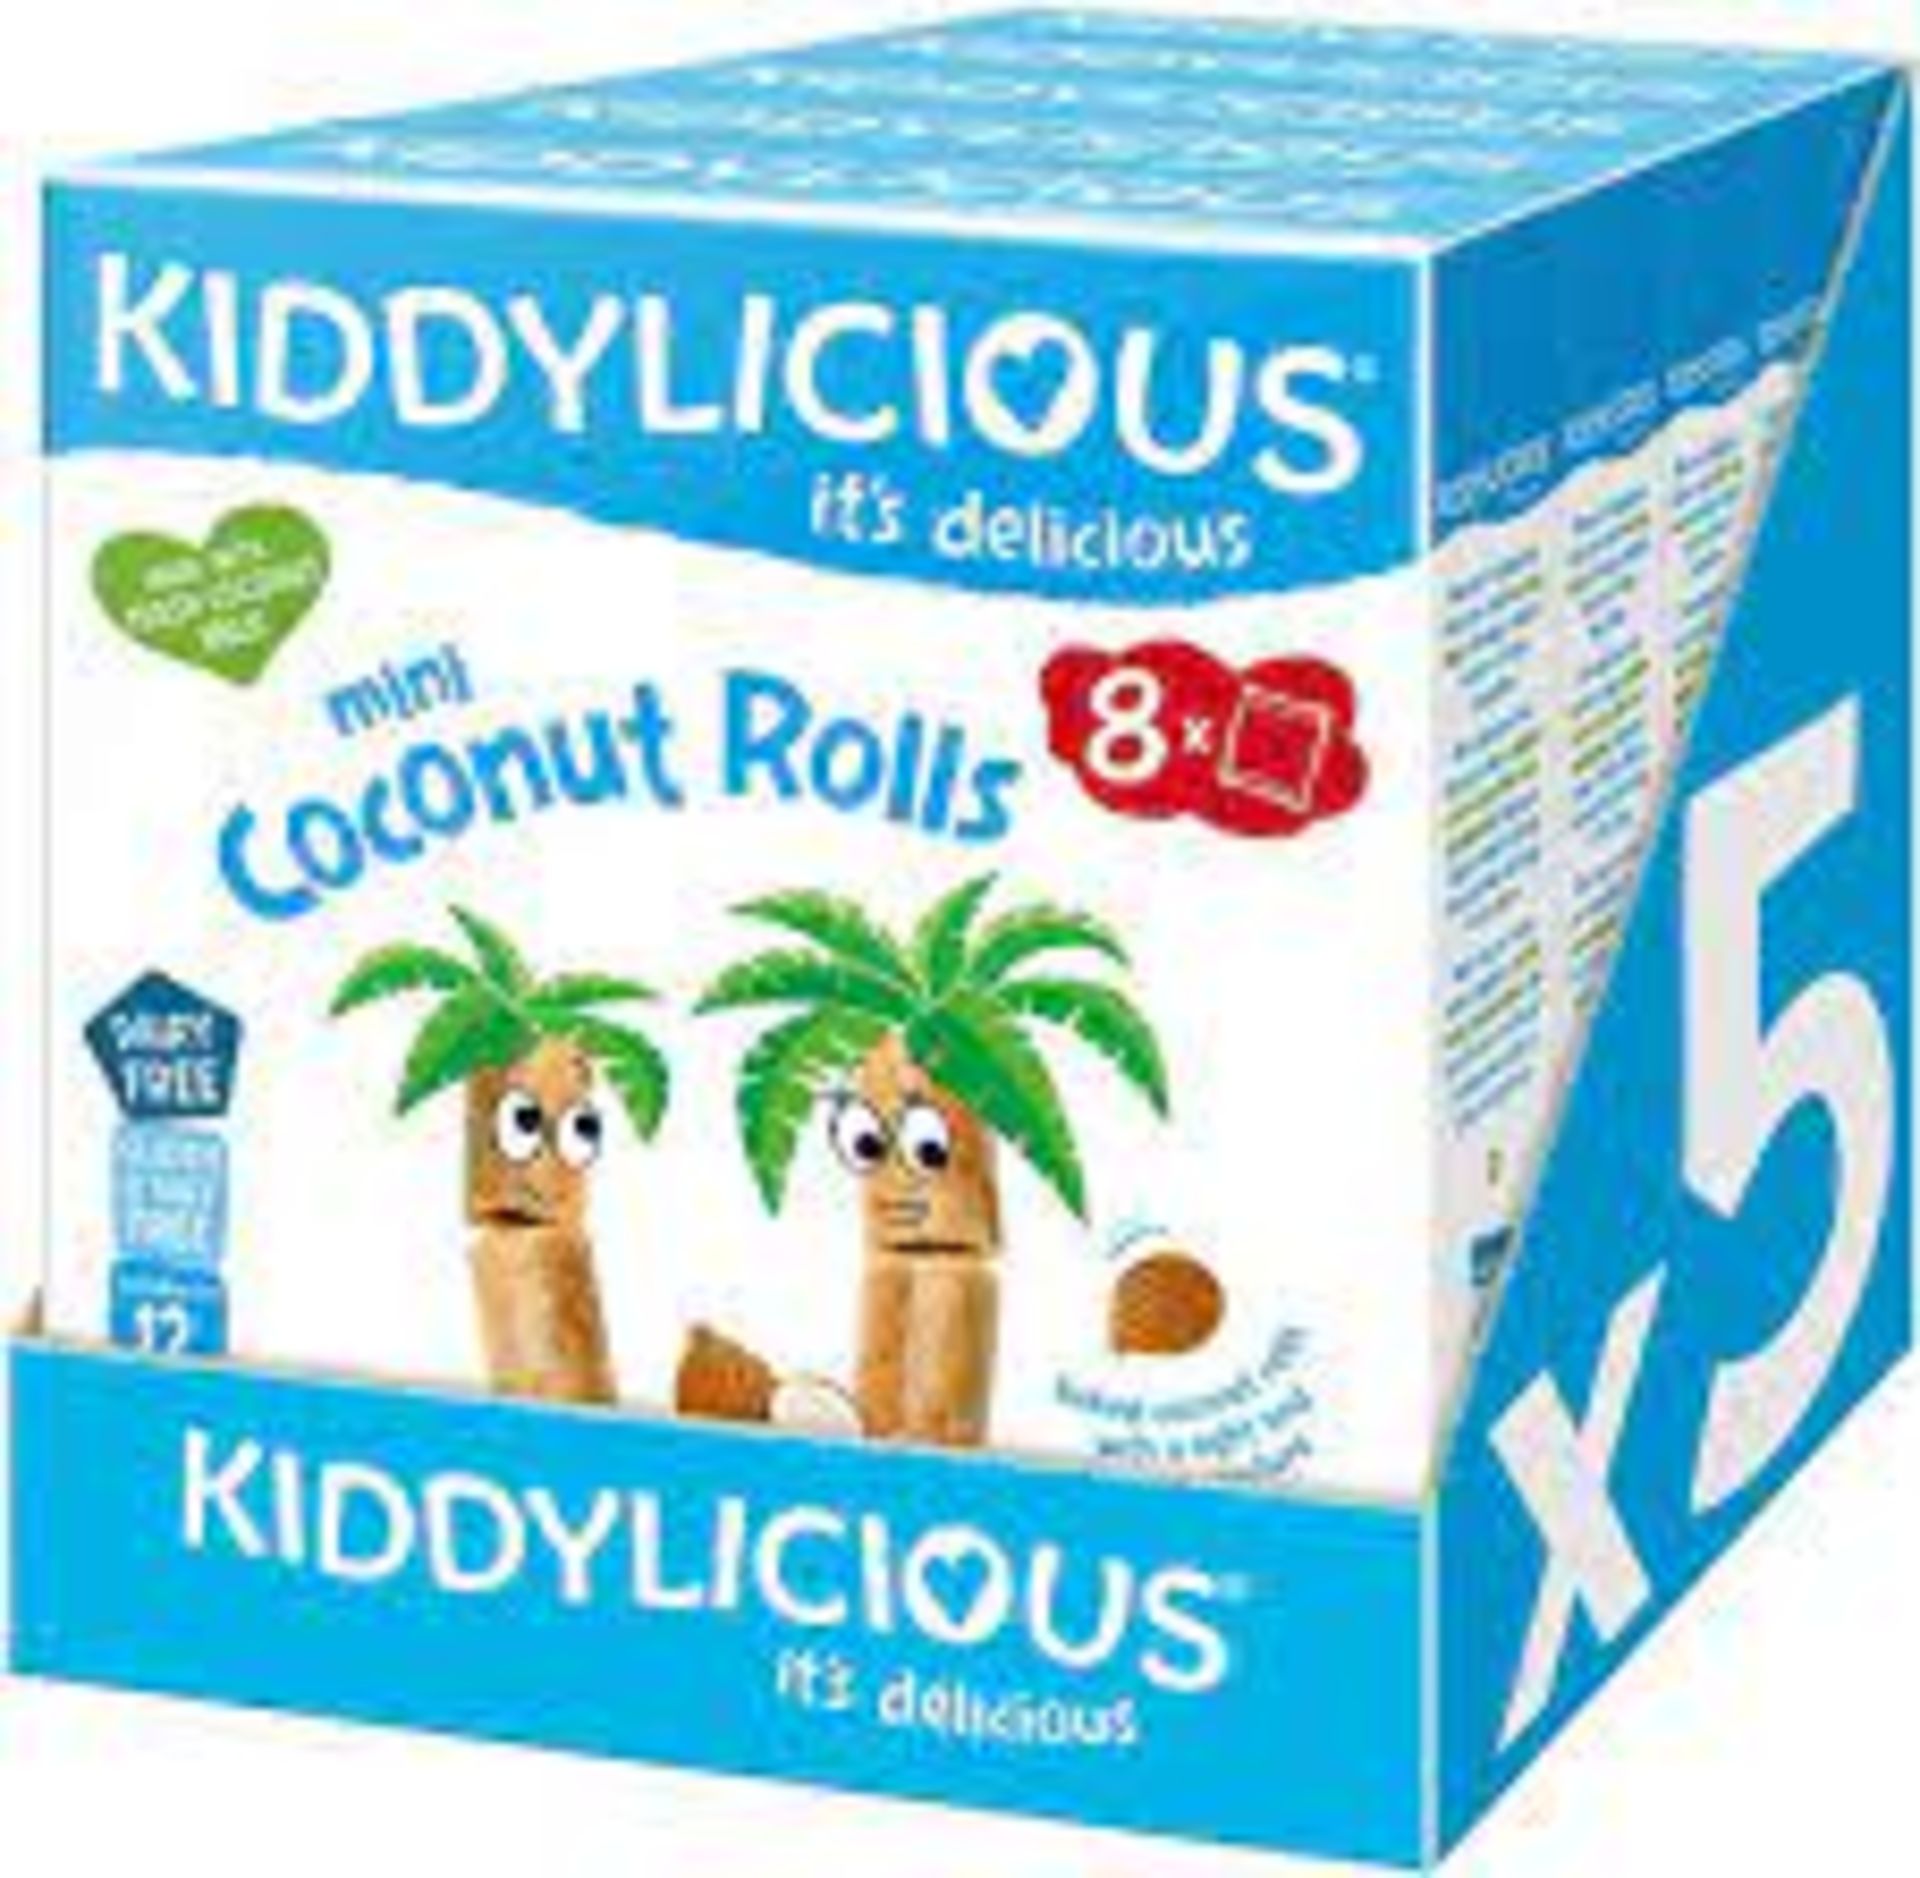 RRP £738 (Approx. Count 85)(G31) spW57m8041L 1 x Kiddylicious Coconut Rolls - Delicious Snacks for